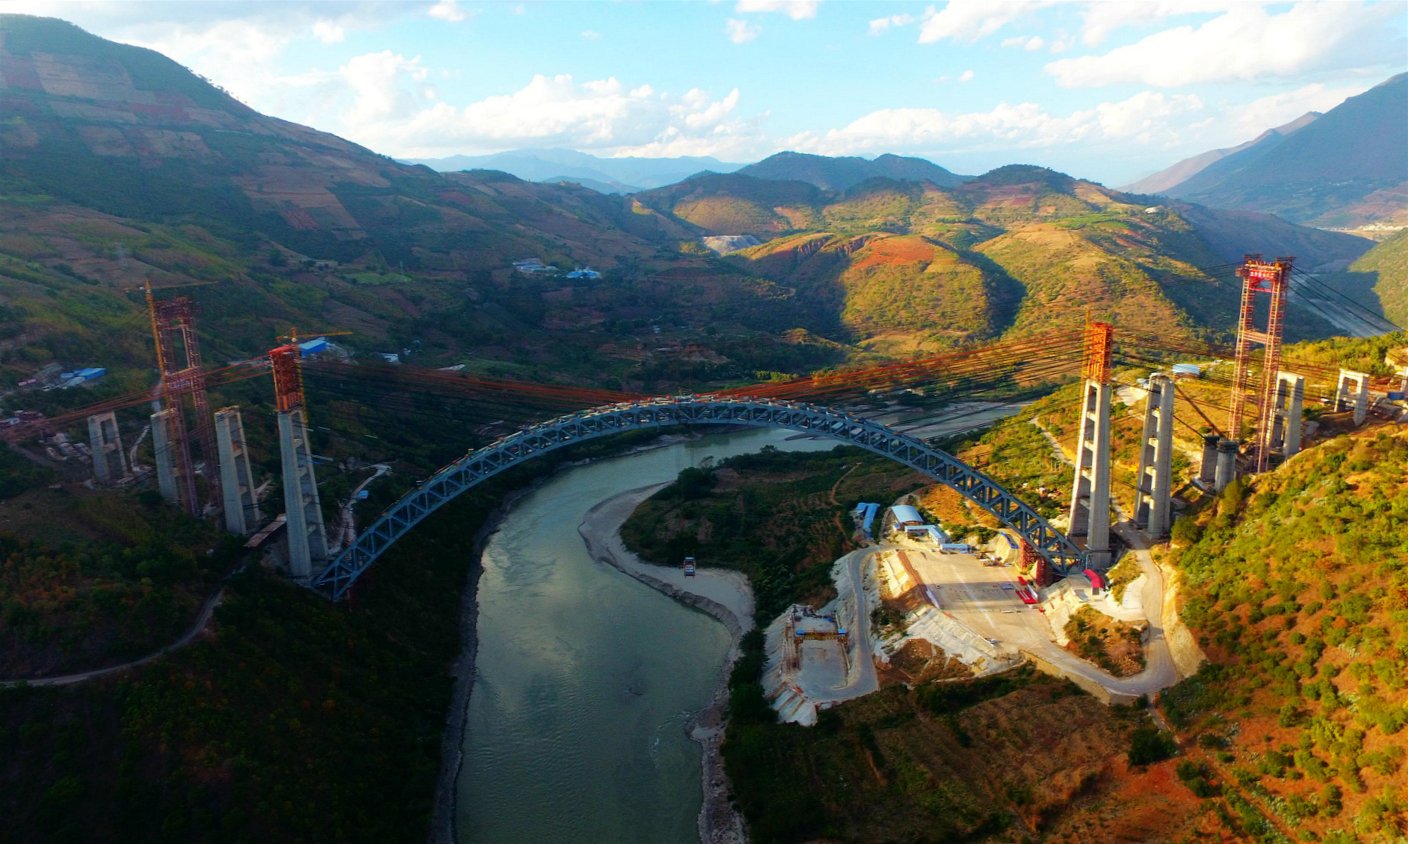 Dali-Ruili railway across the Nujiang river in China’s Yunnan province. This is a key section of the China-Myanmar railway project to link Yunnan and Yangon [image from: Alamy]